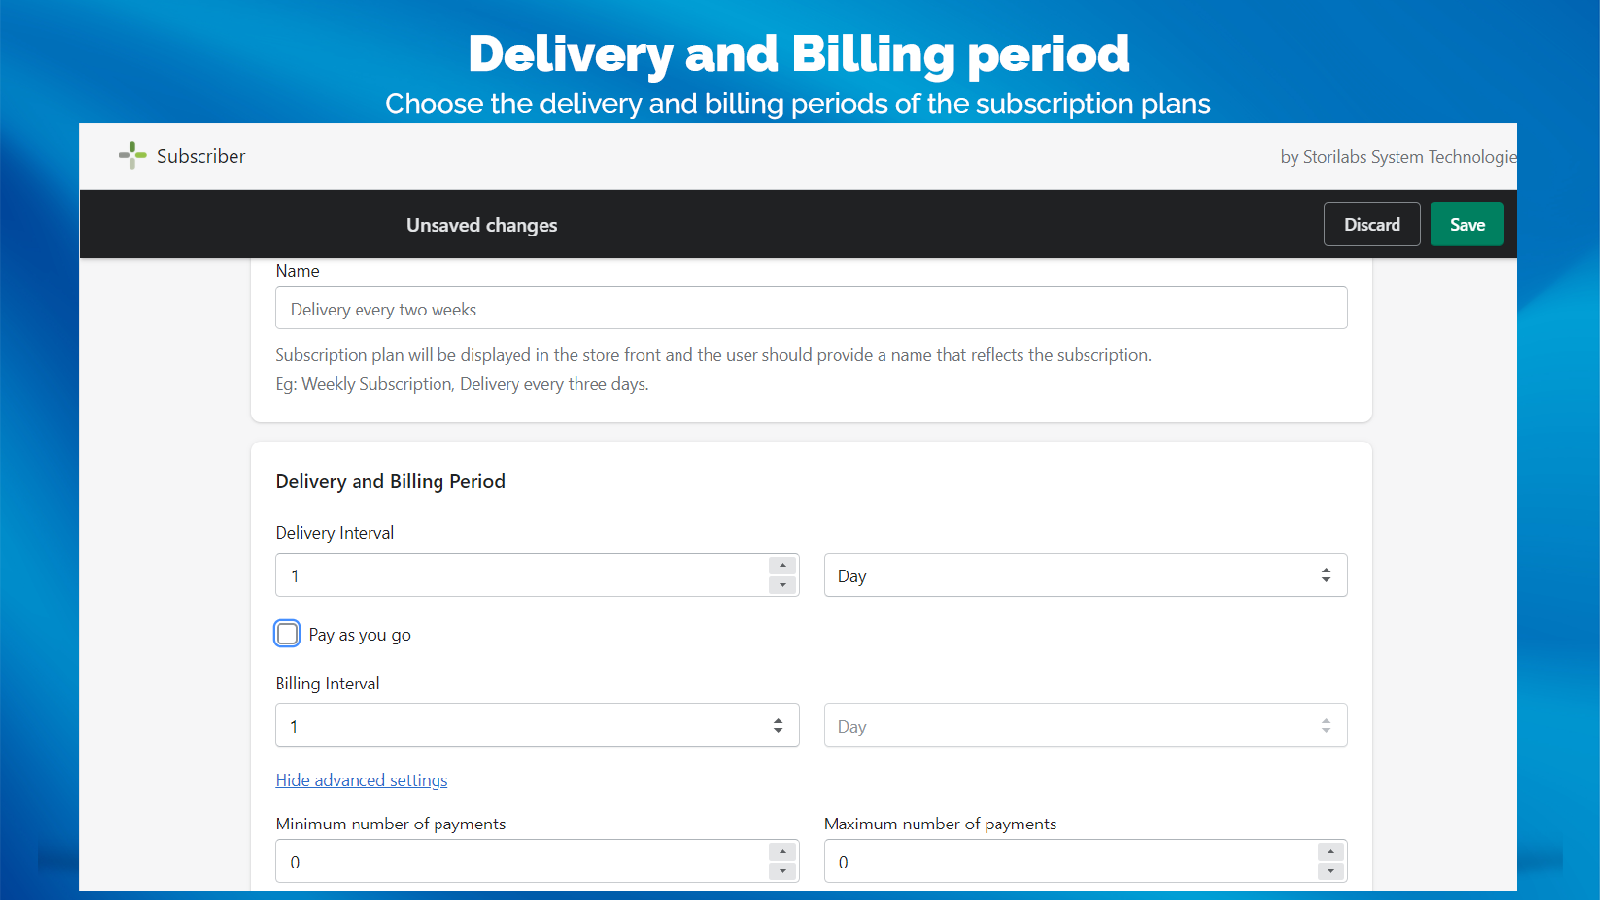 Customizable Billing and Delivery